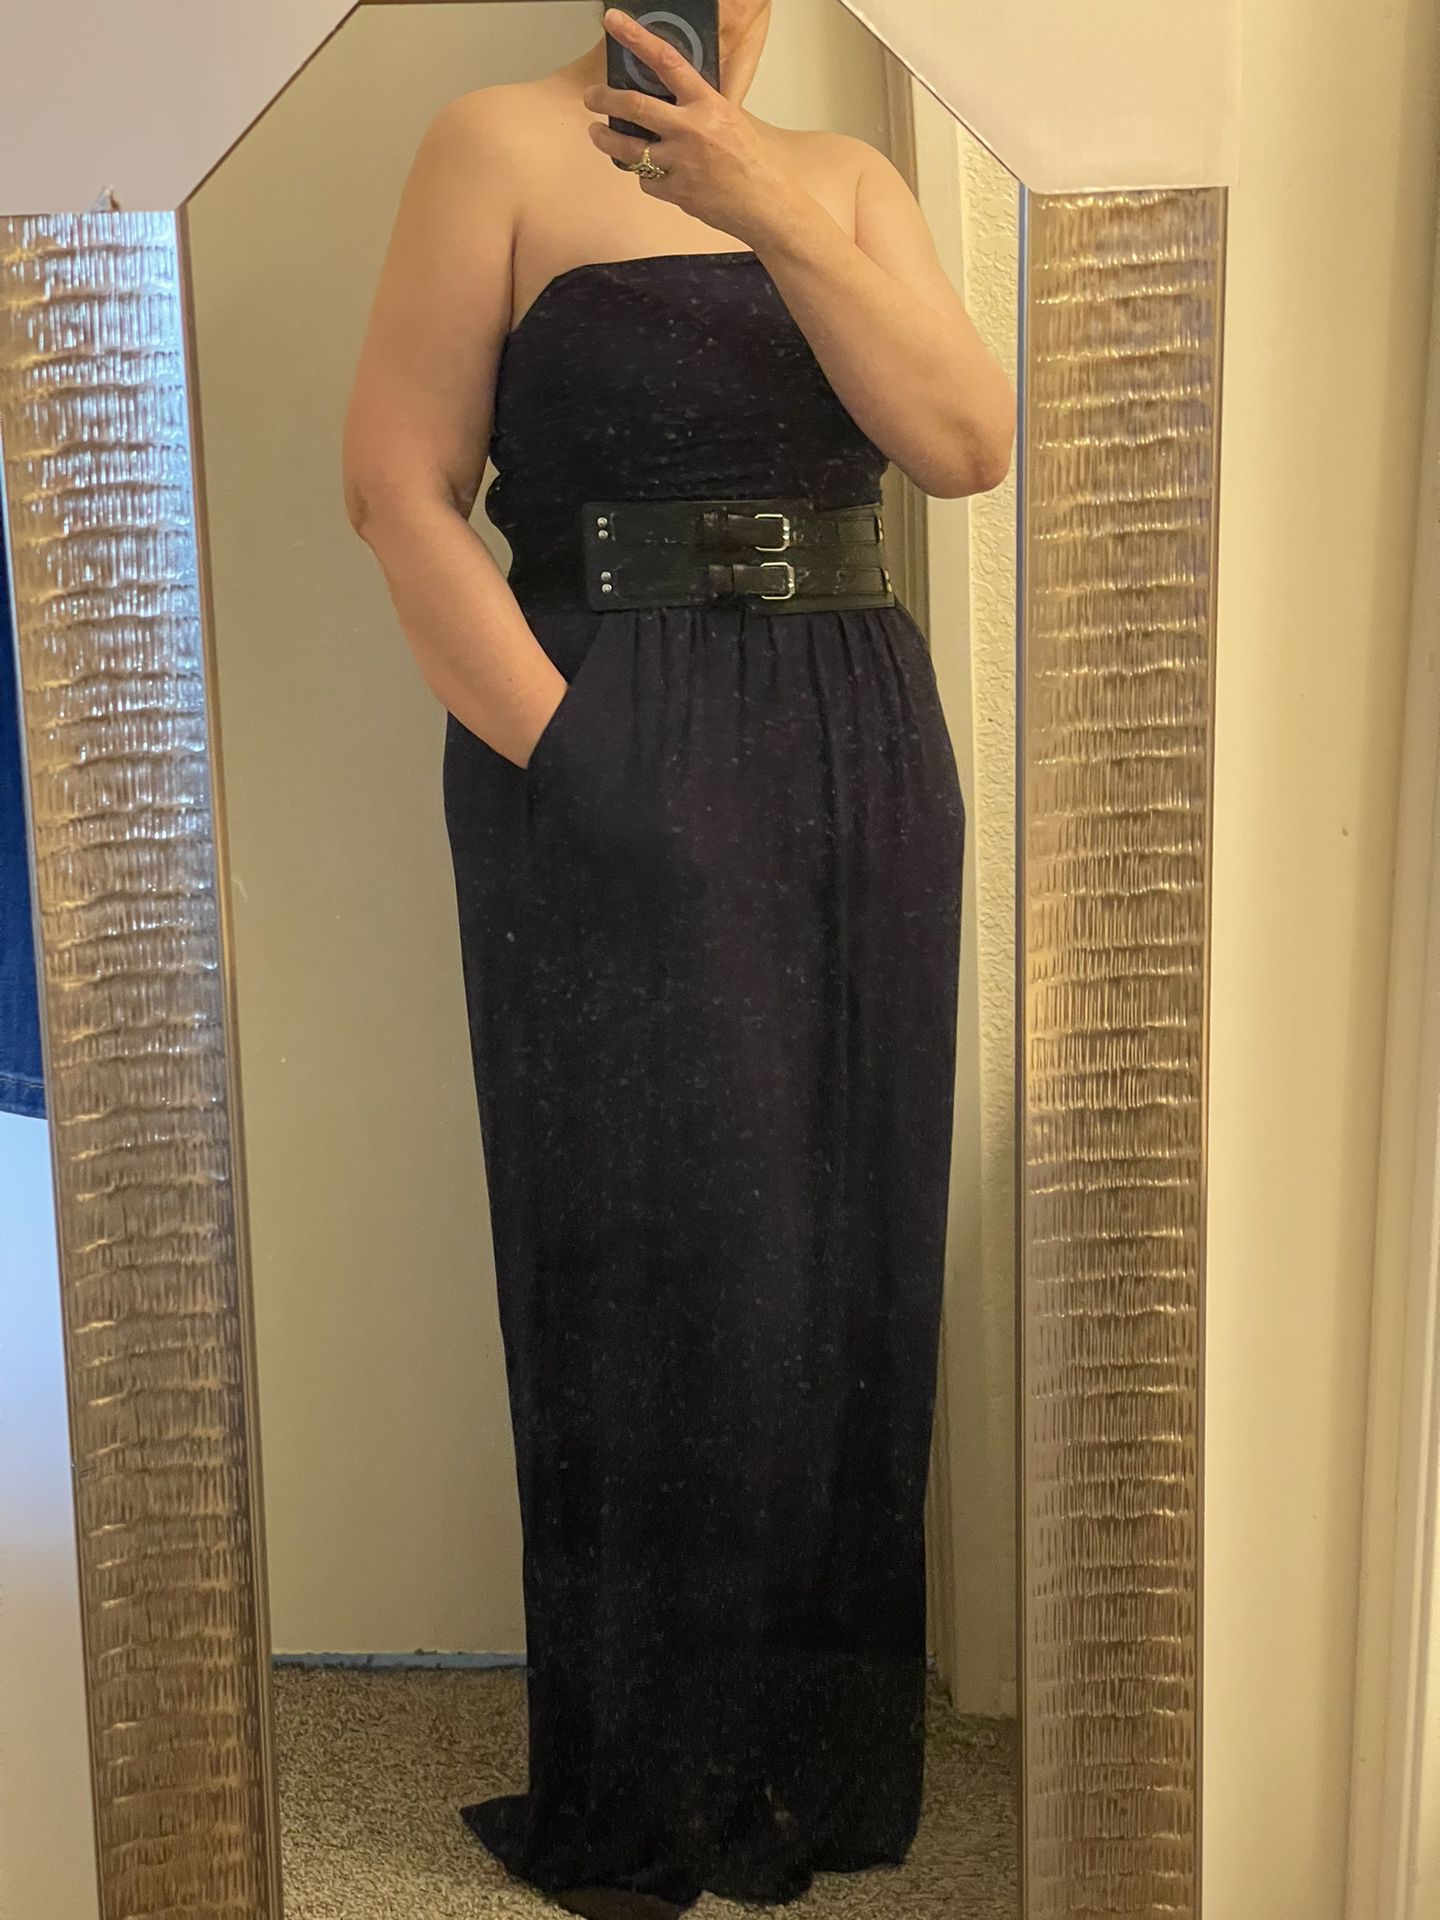 Navy blue maxi strapless dress size XL  Without belt , can add the red belt if you like it 